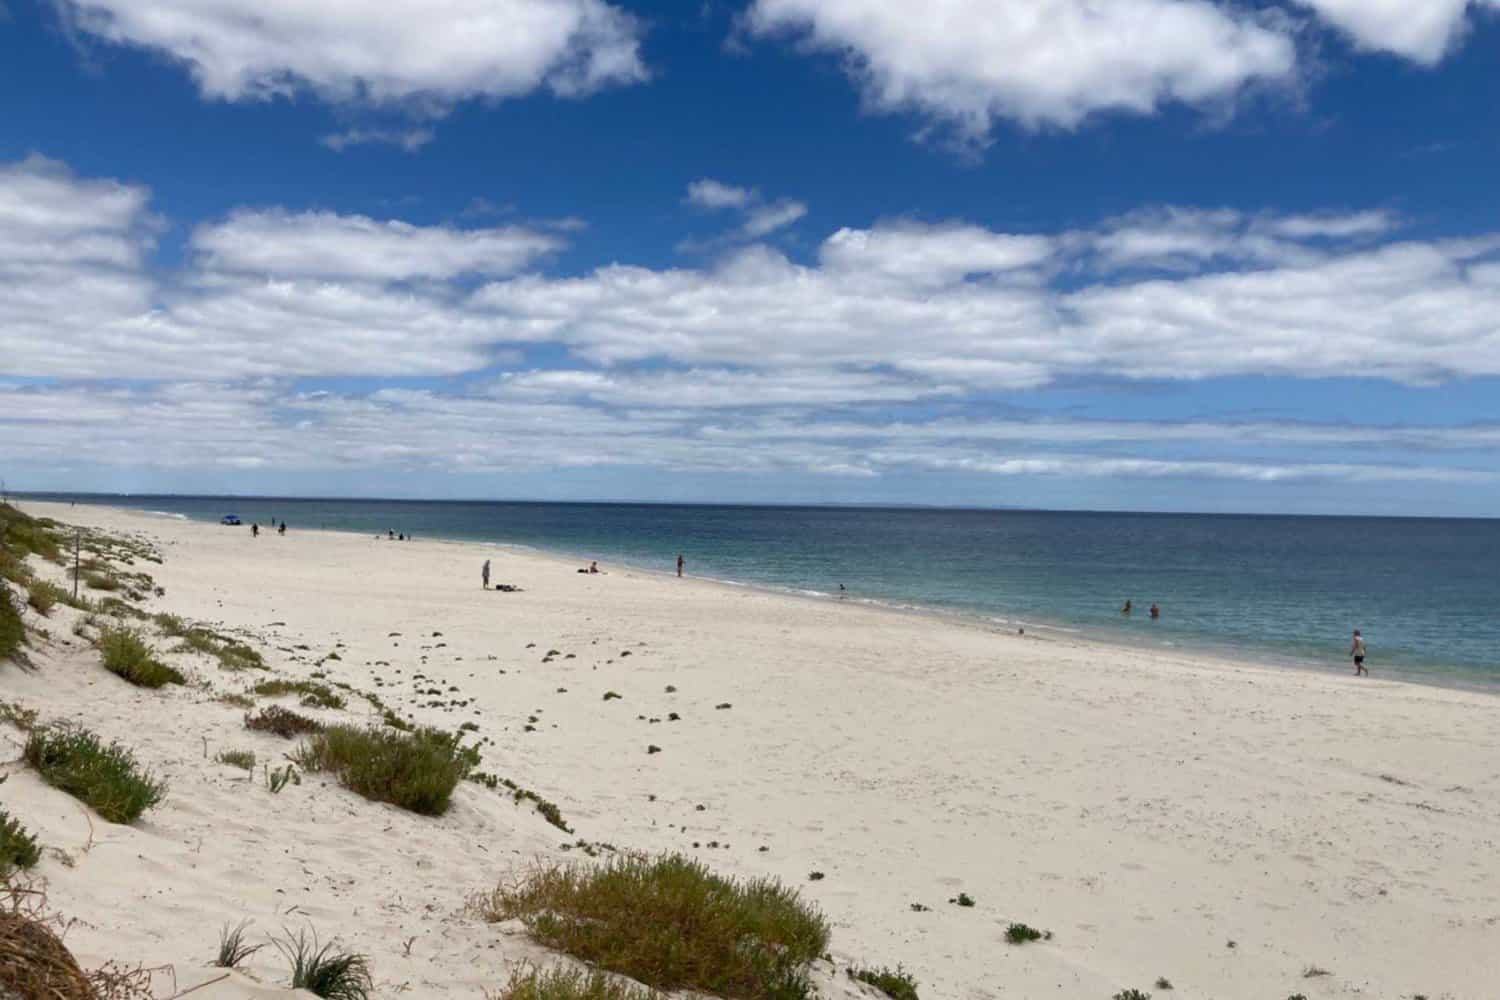 Overcast summer view of Peppermint Grove Beach, with calm grey skies meeting the serene waters, and the sandy shore gently curving into the distance, one of the popular Margaret River beaches on offer